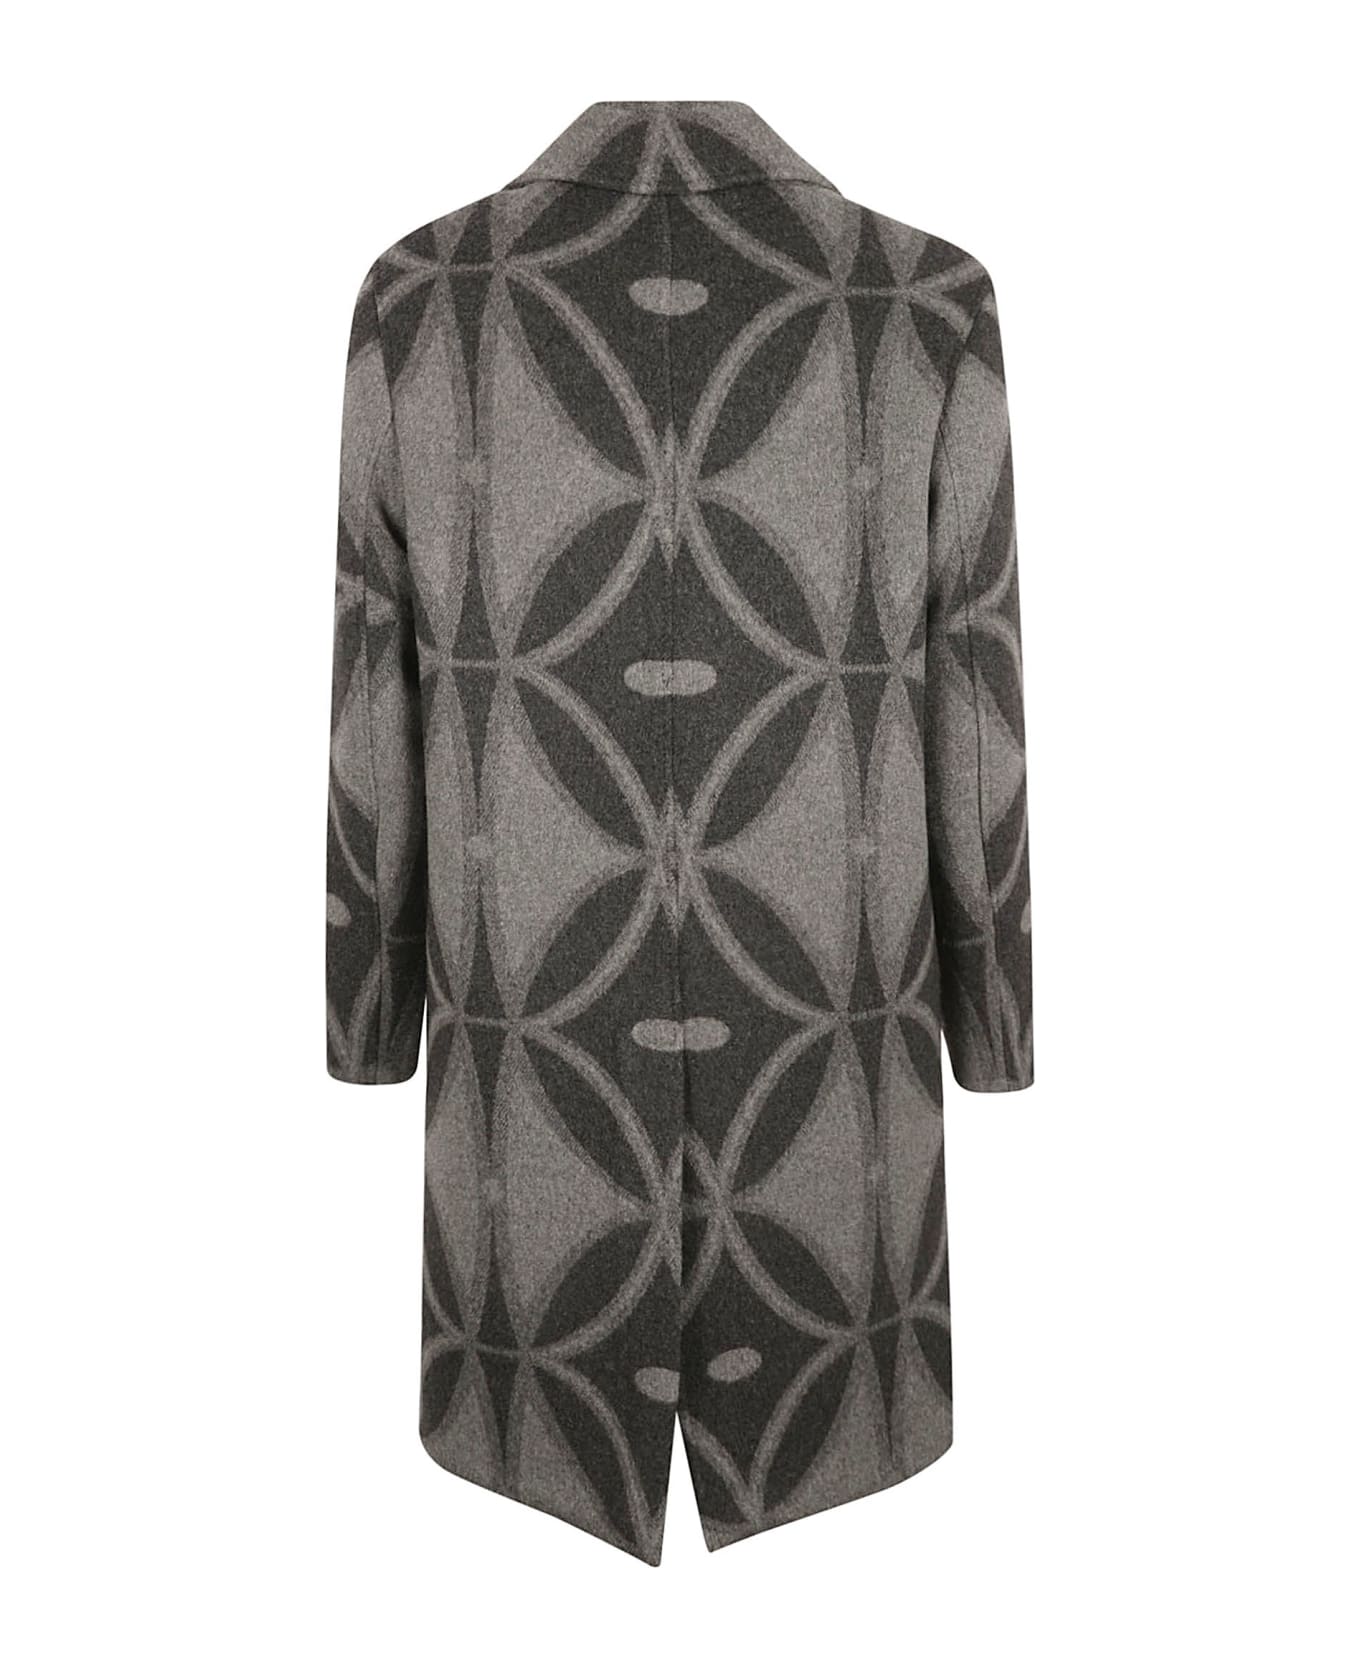 Etro Patterned Button-up Coat - Grey コート